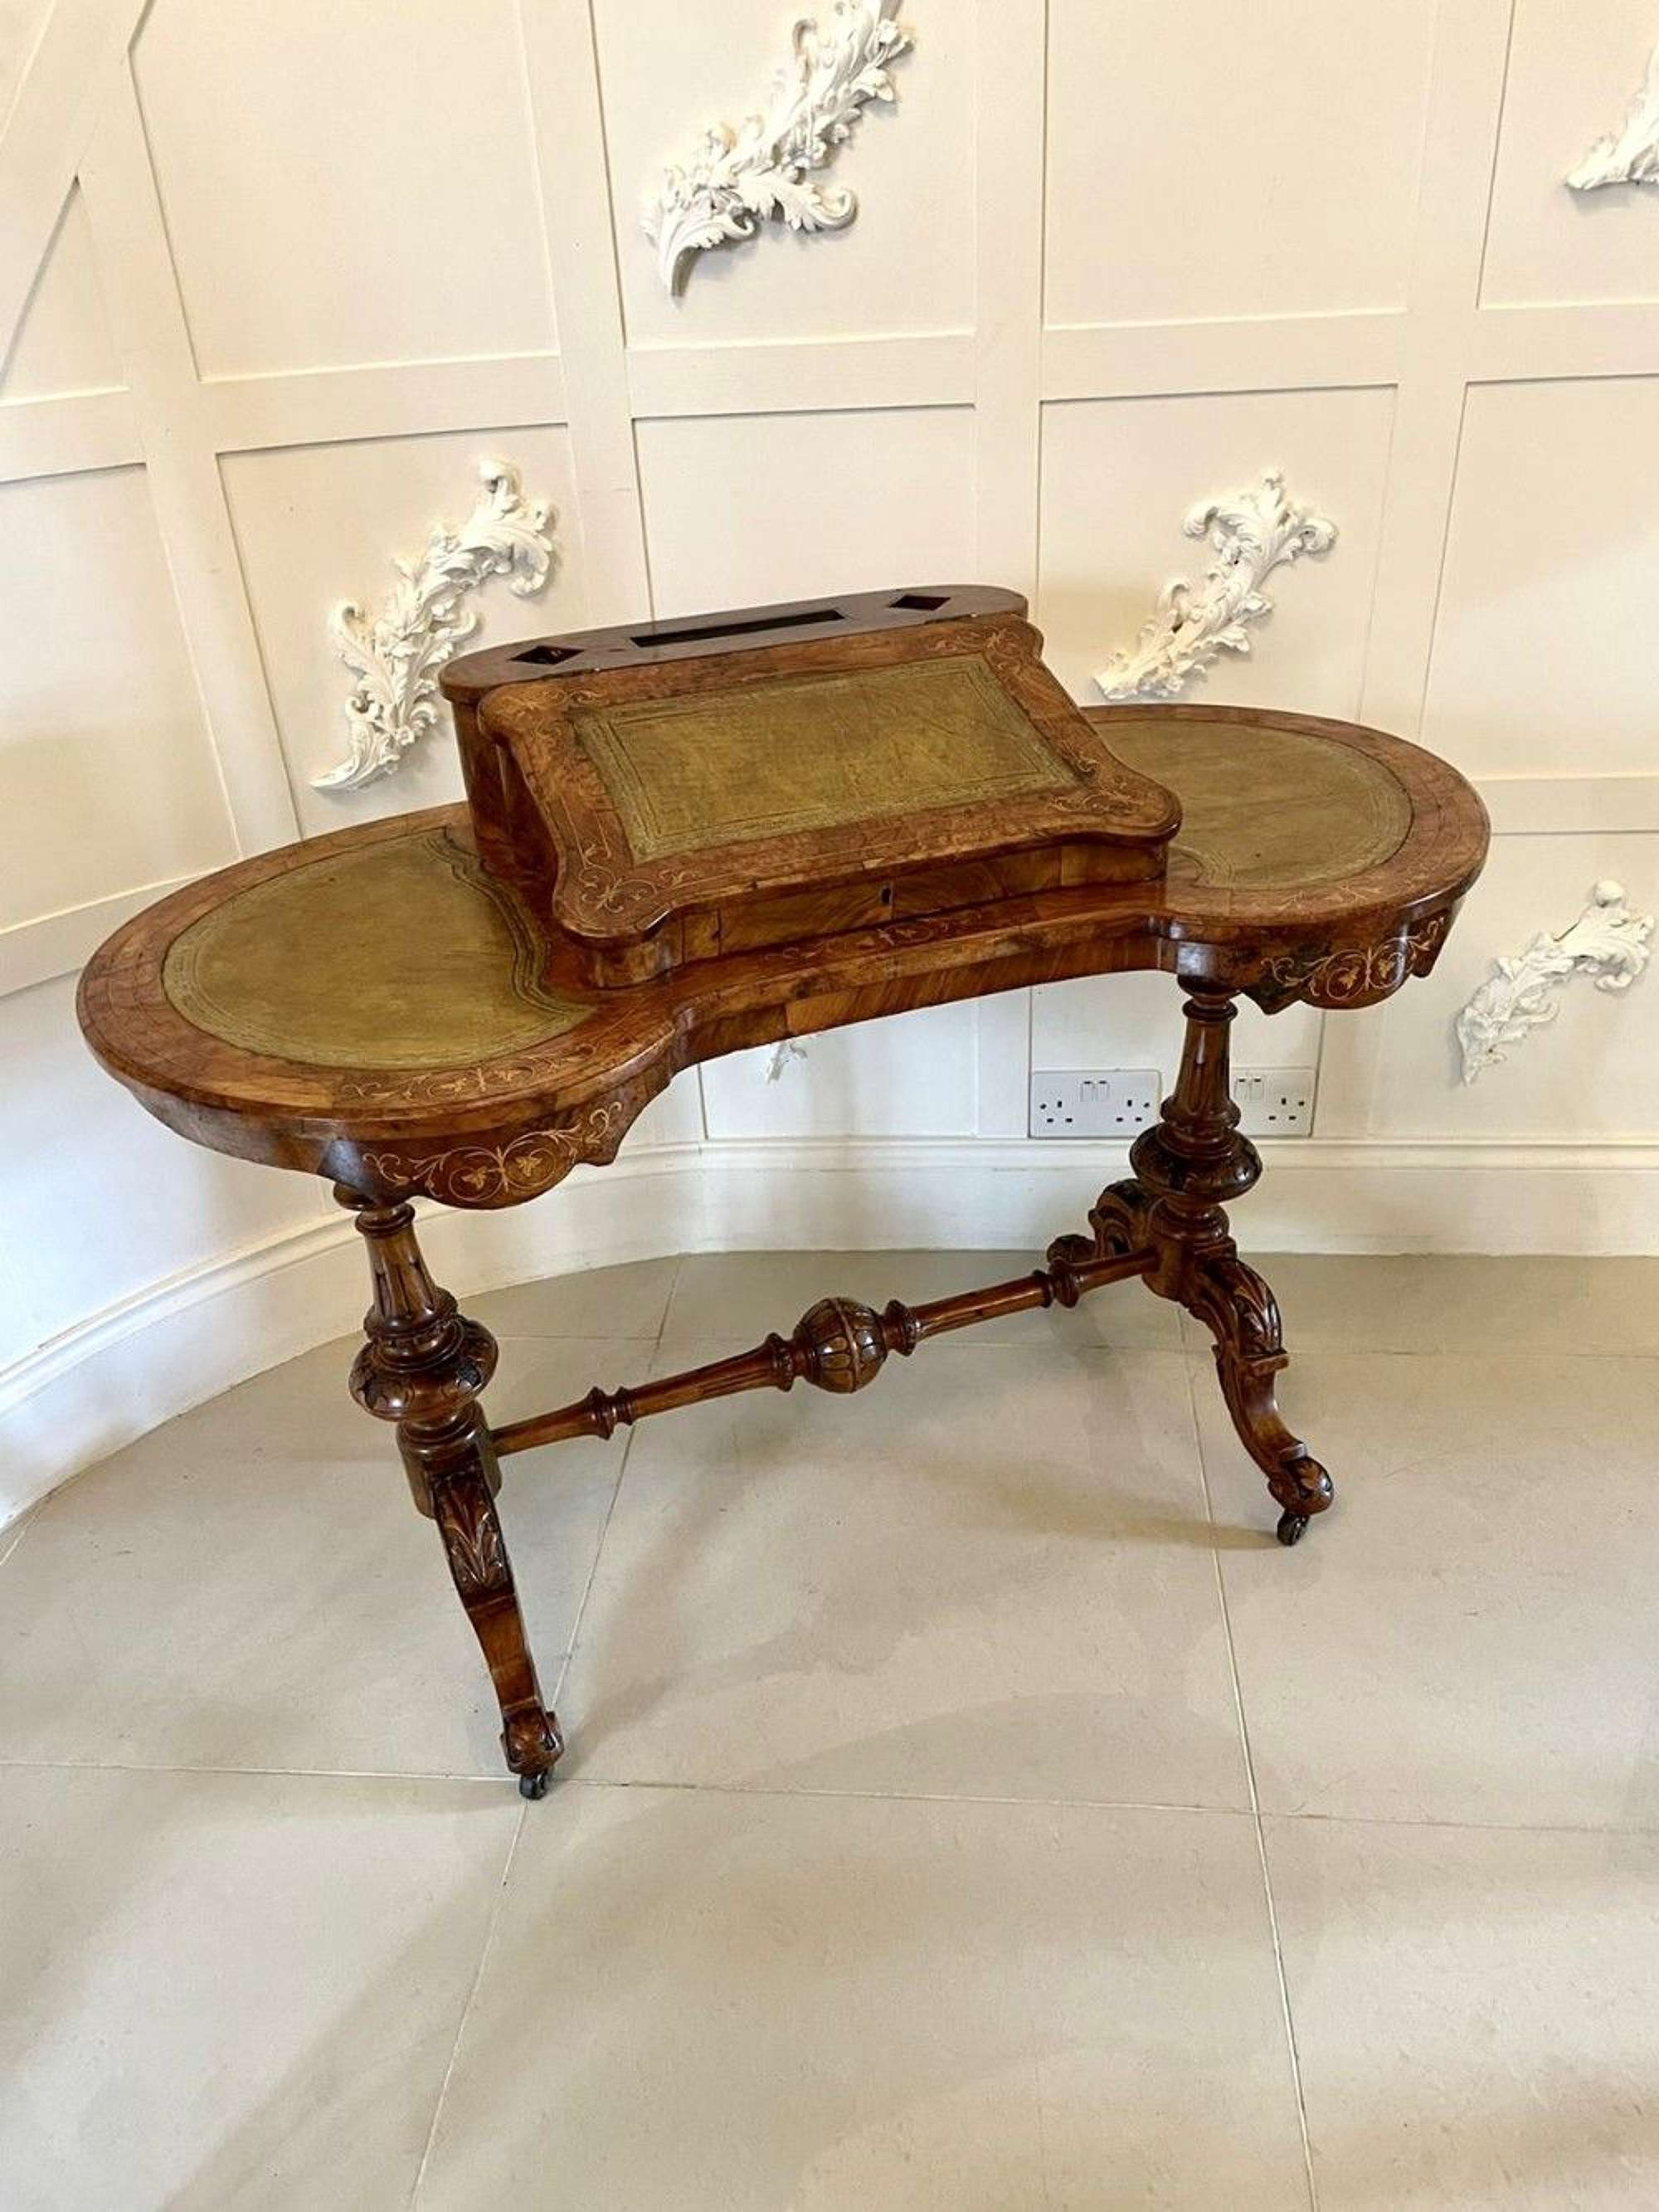 Quality Antique Victorian Freestanding Inlaid Burr Walnut Kidney Shaped Writing Table